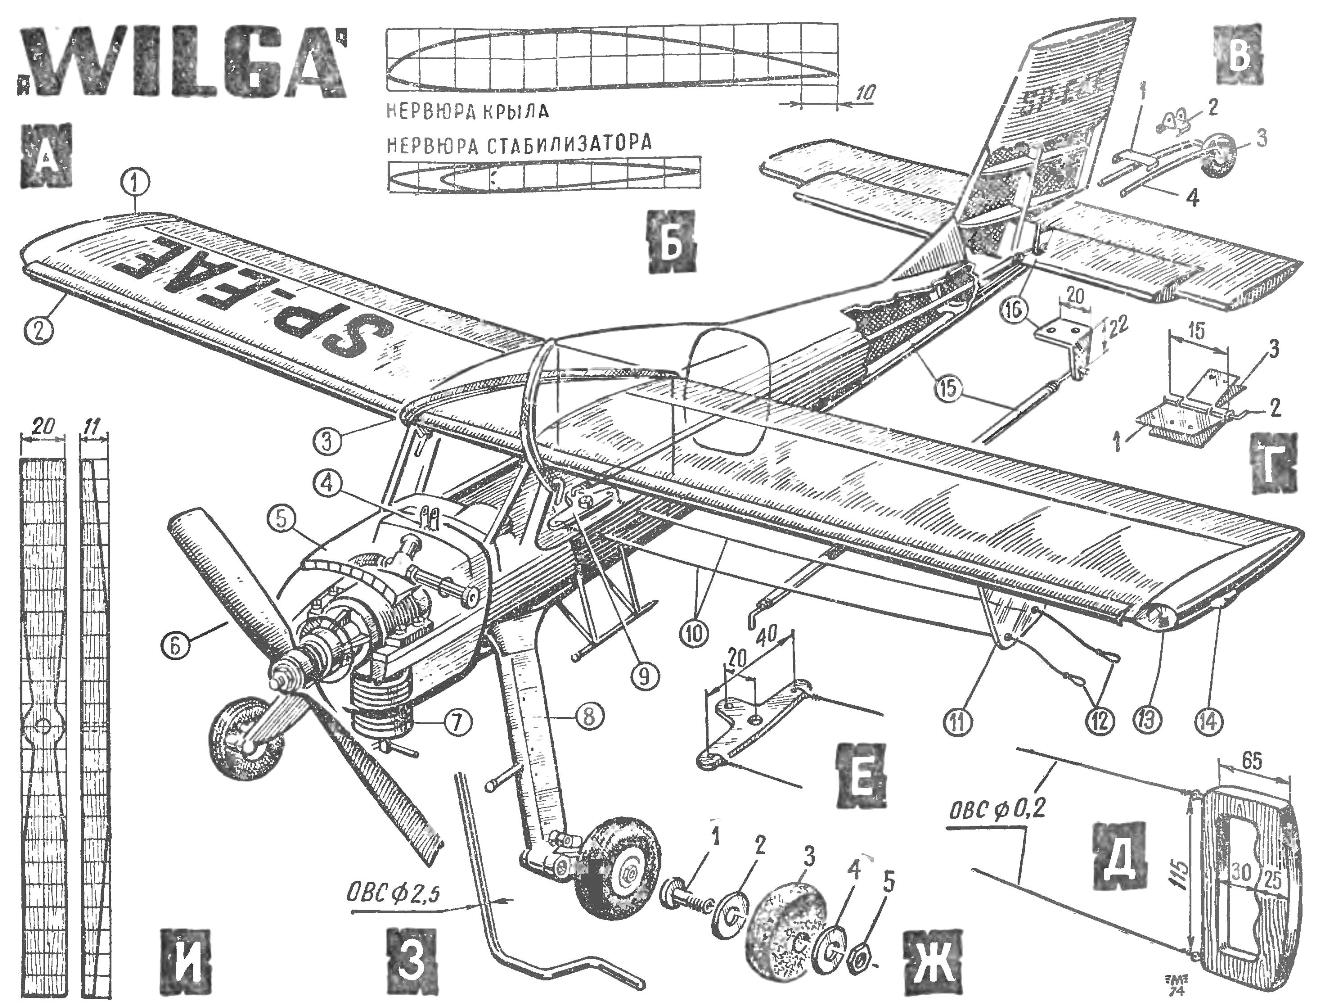 Fig. 1. The overall layout of the model airplane 